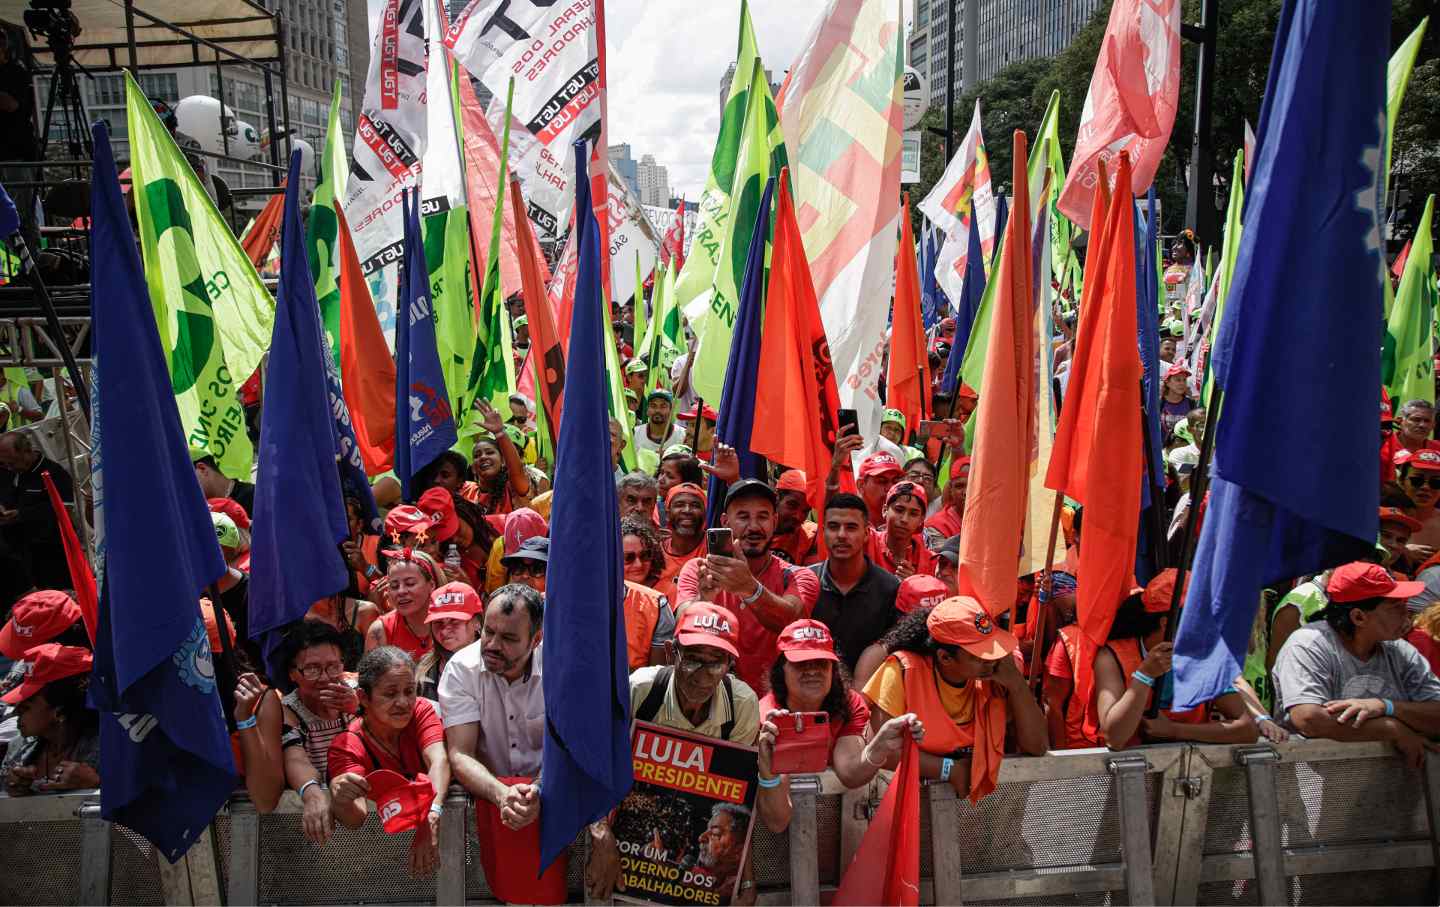 people hold flags at a may day rally in Brazil